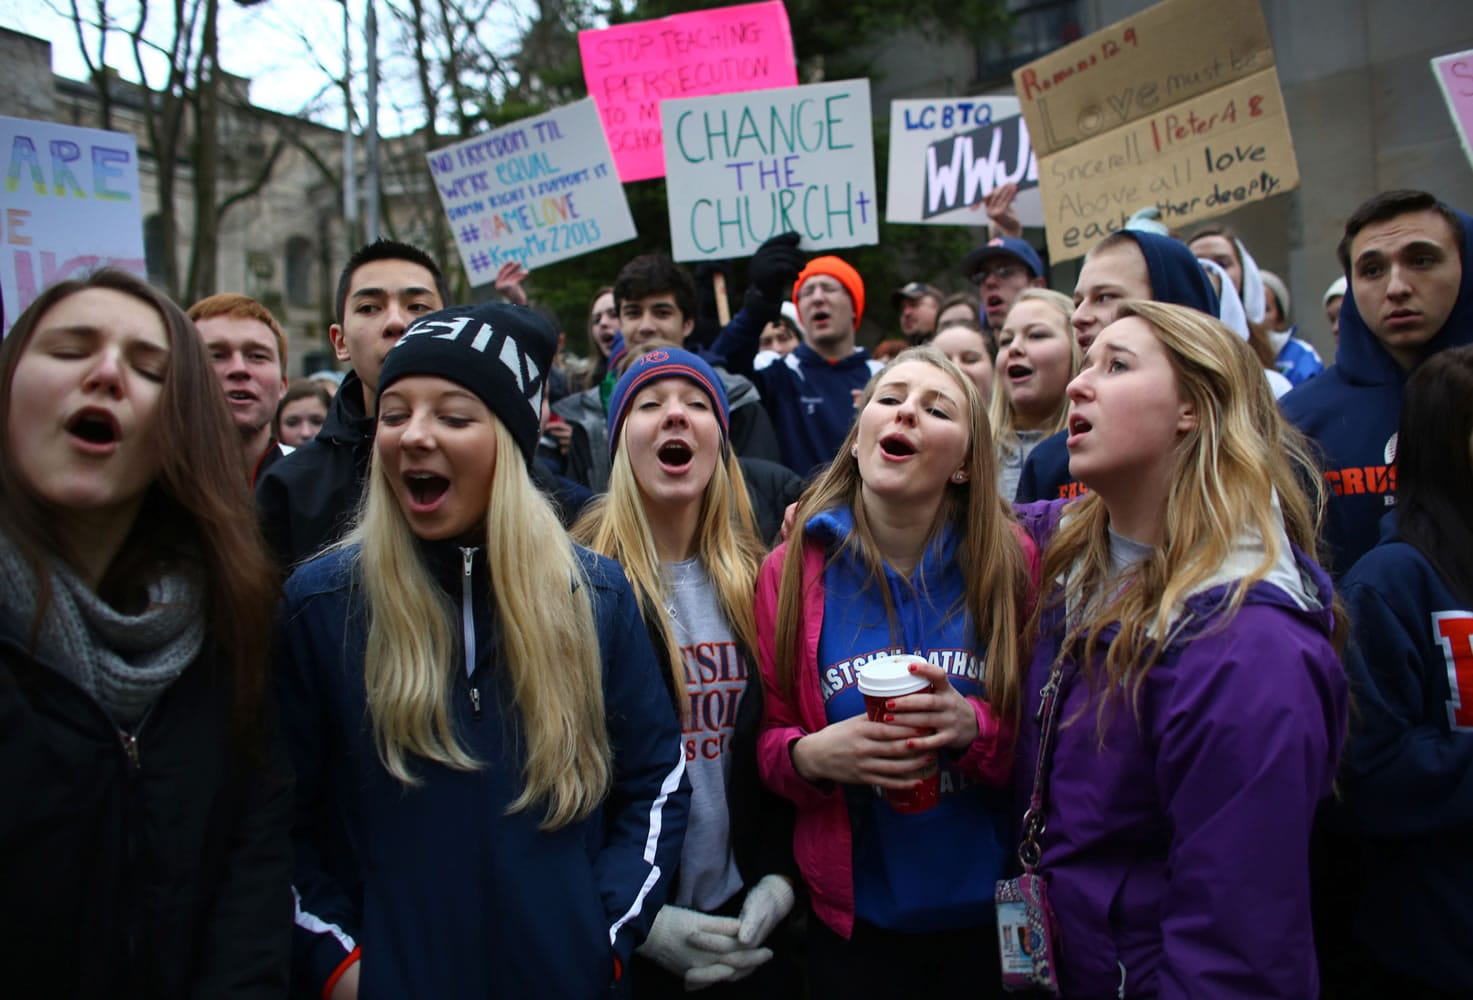 Students sing vocalist Mary Lambert's lyrics to the song &quot;Same Love&quot; by Macklemore &amp; Ryan Lewis outside of the Chancery building for the Archdiocese of Seattle, Friday, Dec. 20, 2013, in Seattle. The students were rallying for Eastside Catholic's Vice Principal Mike Zmuda, who resigned his position after officials with the archdiocese discovered that he was in a same-sex marriage. He was told the marriage violated his contract.